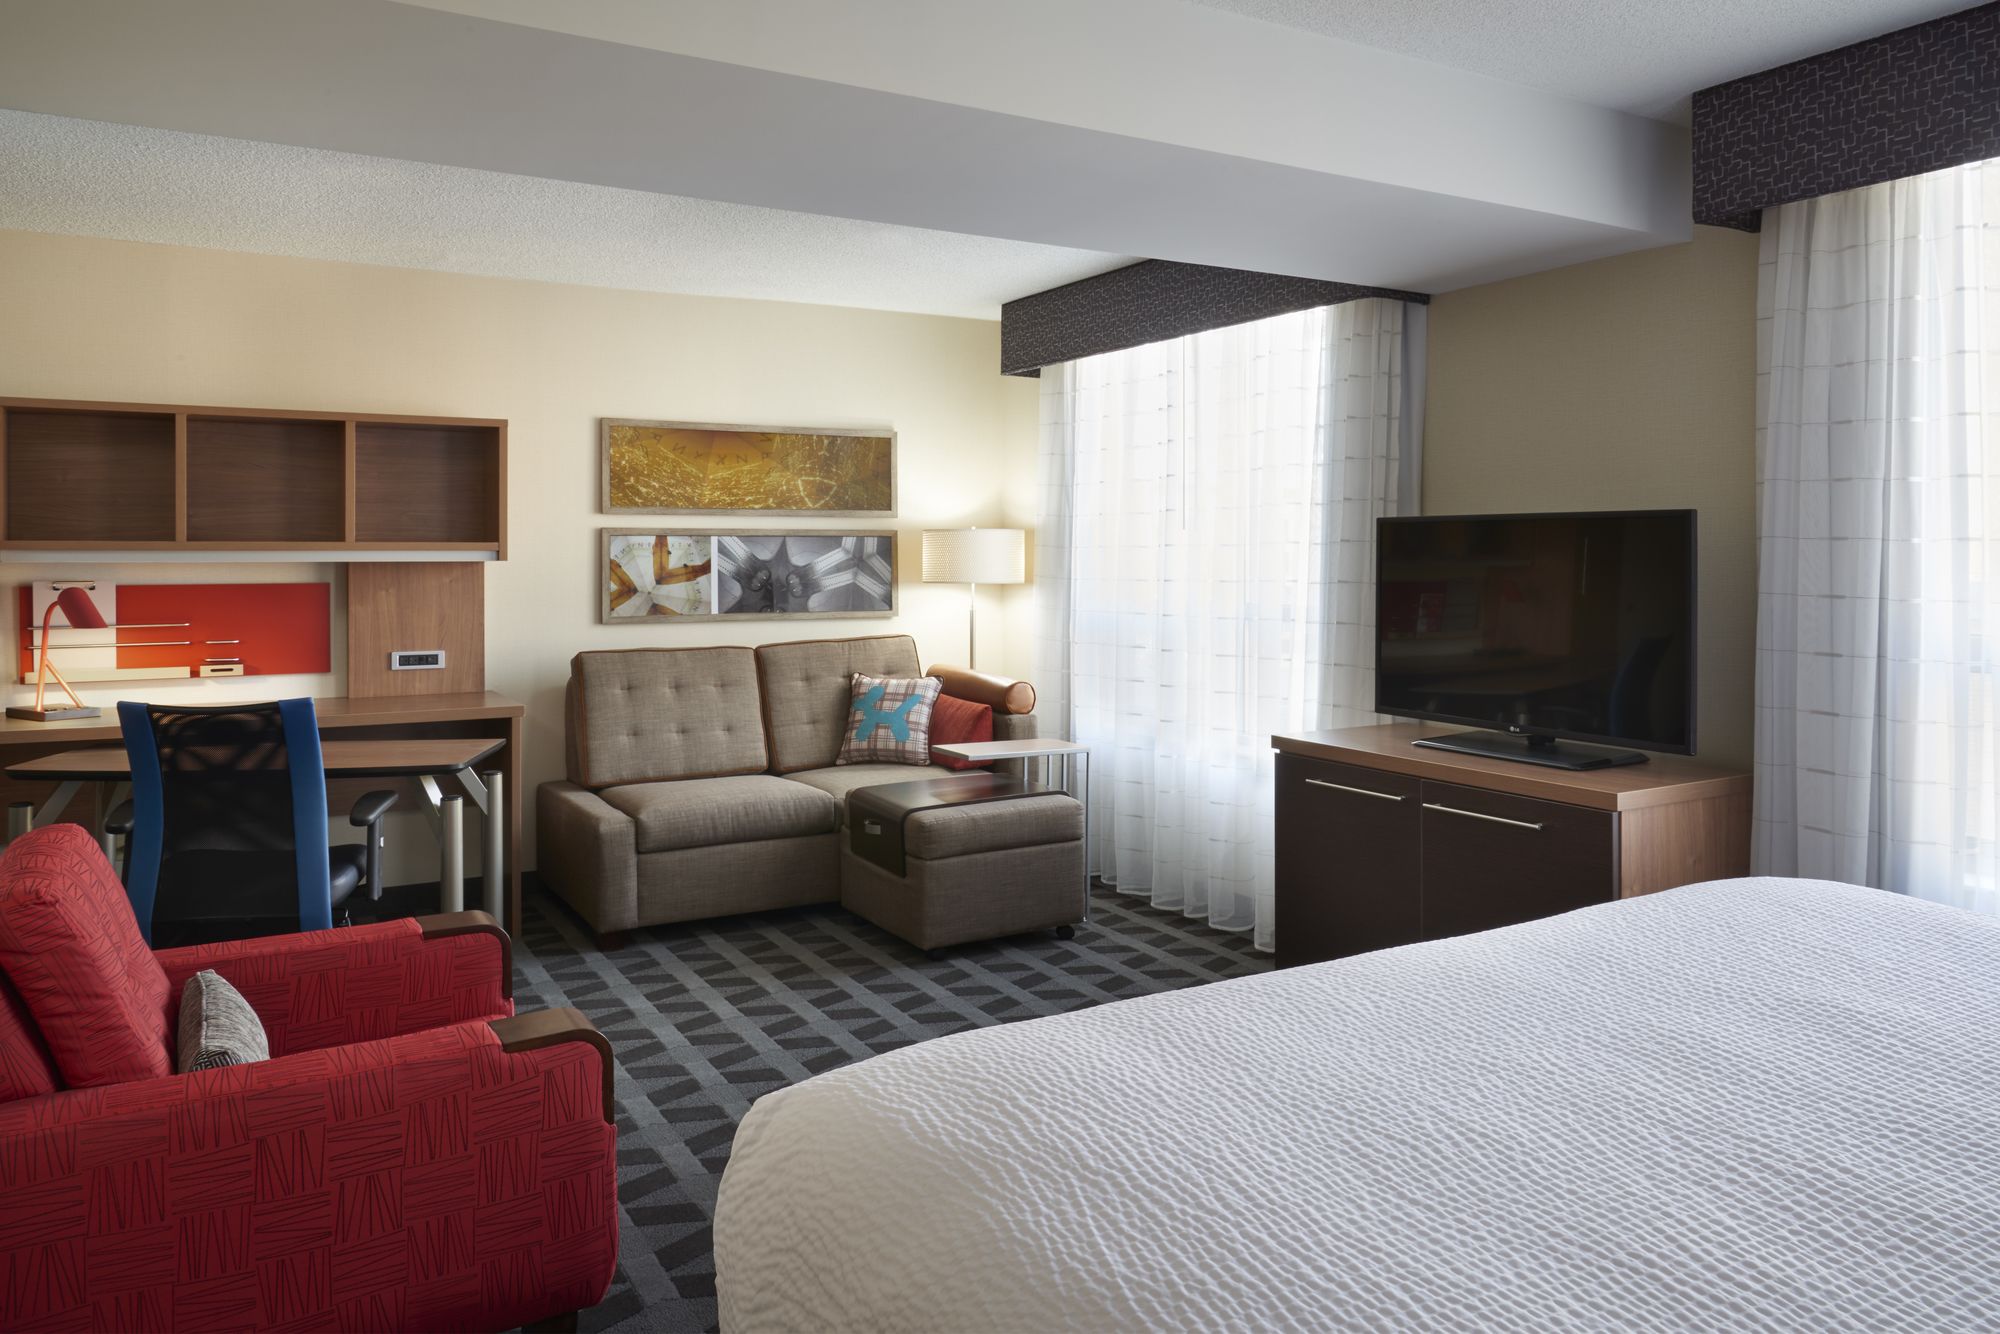 TownePlace Suites Windsor